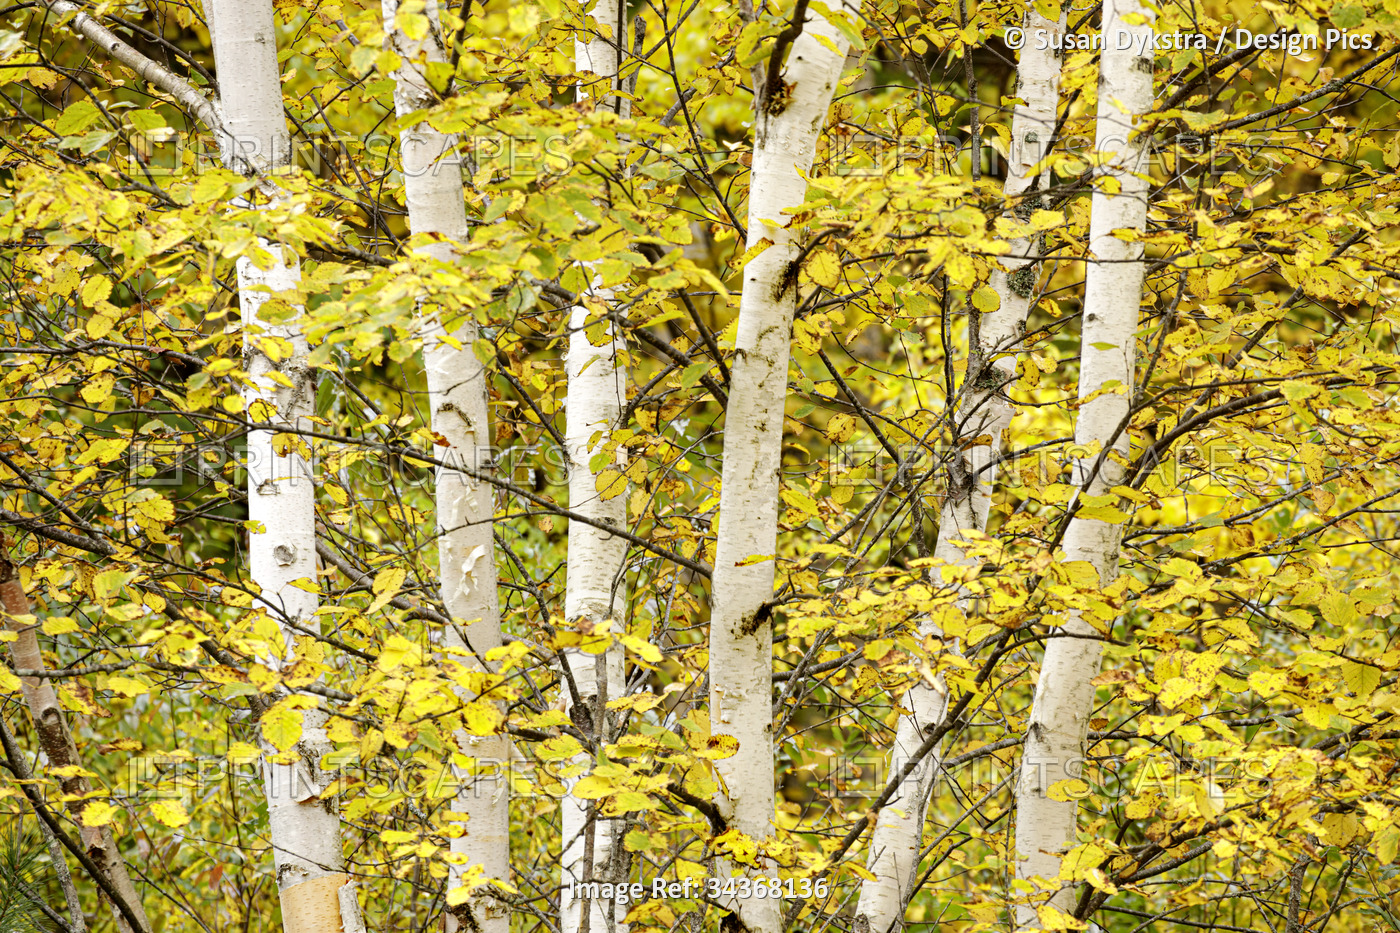 Birch trees in yellow autumn leaves